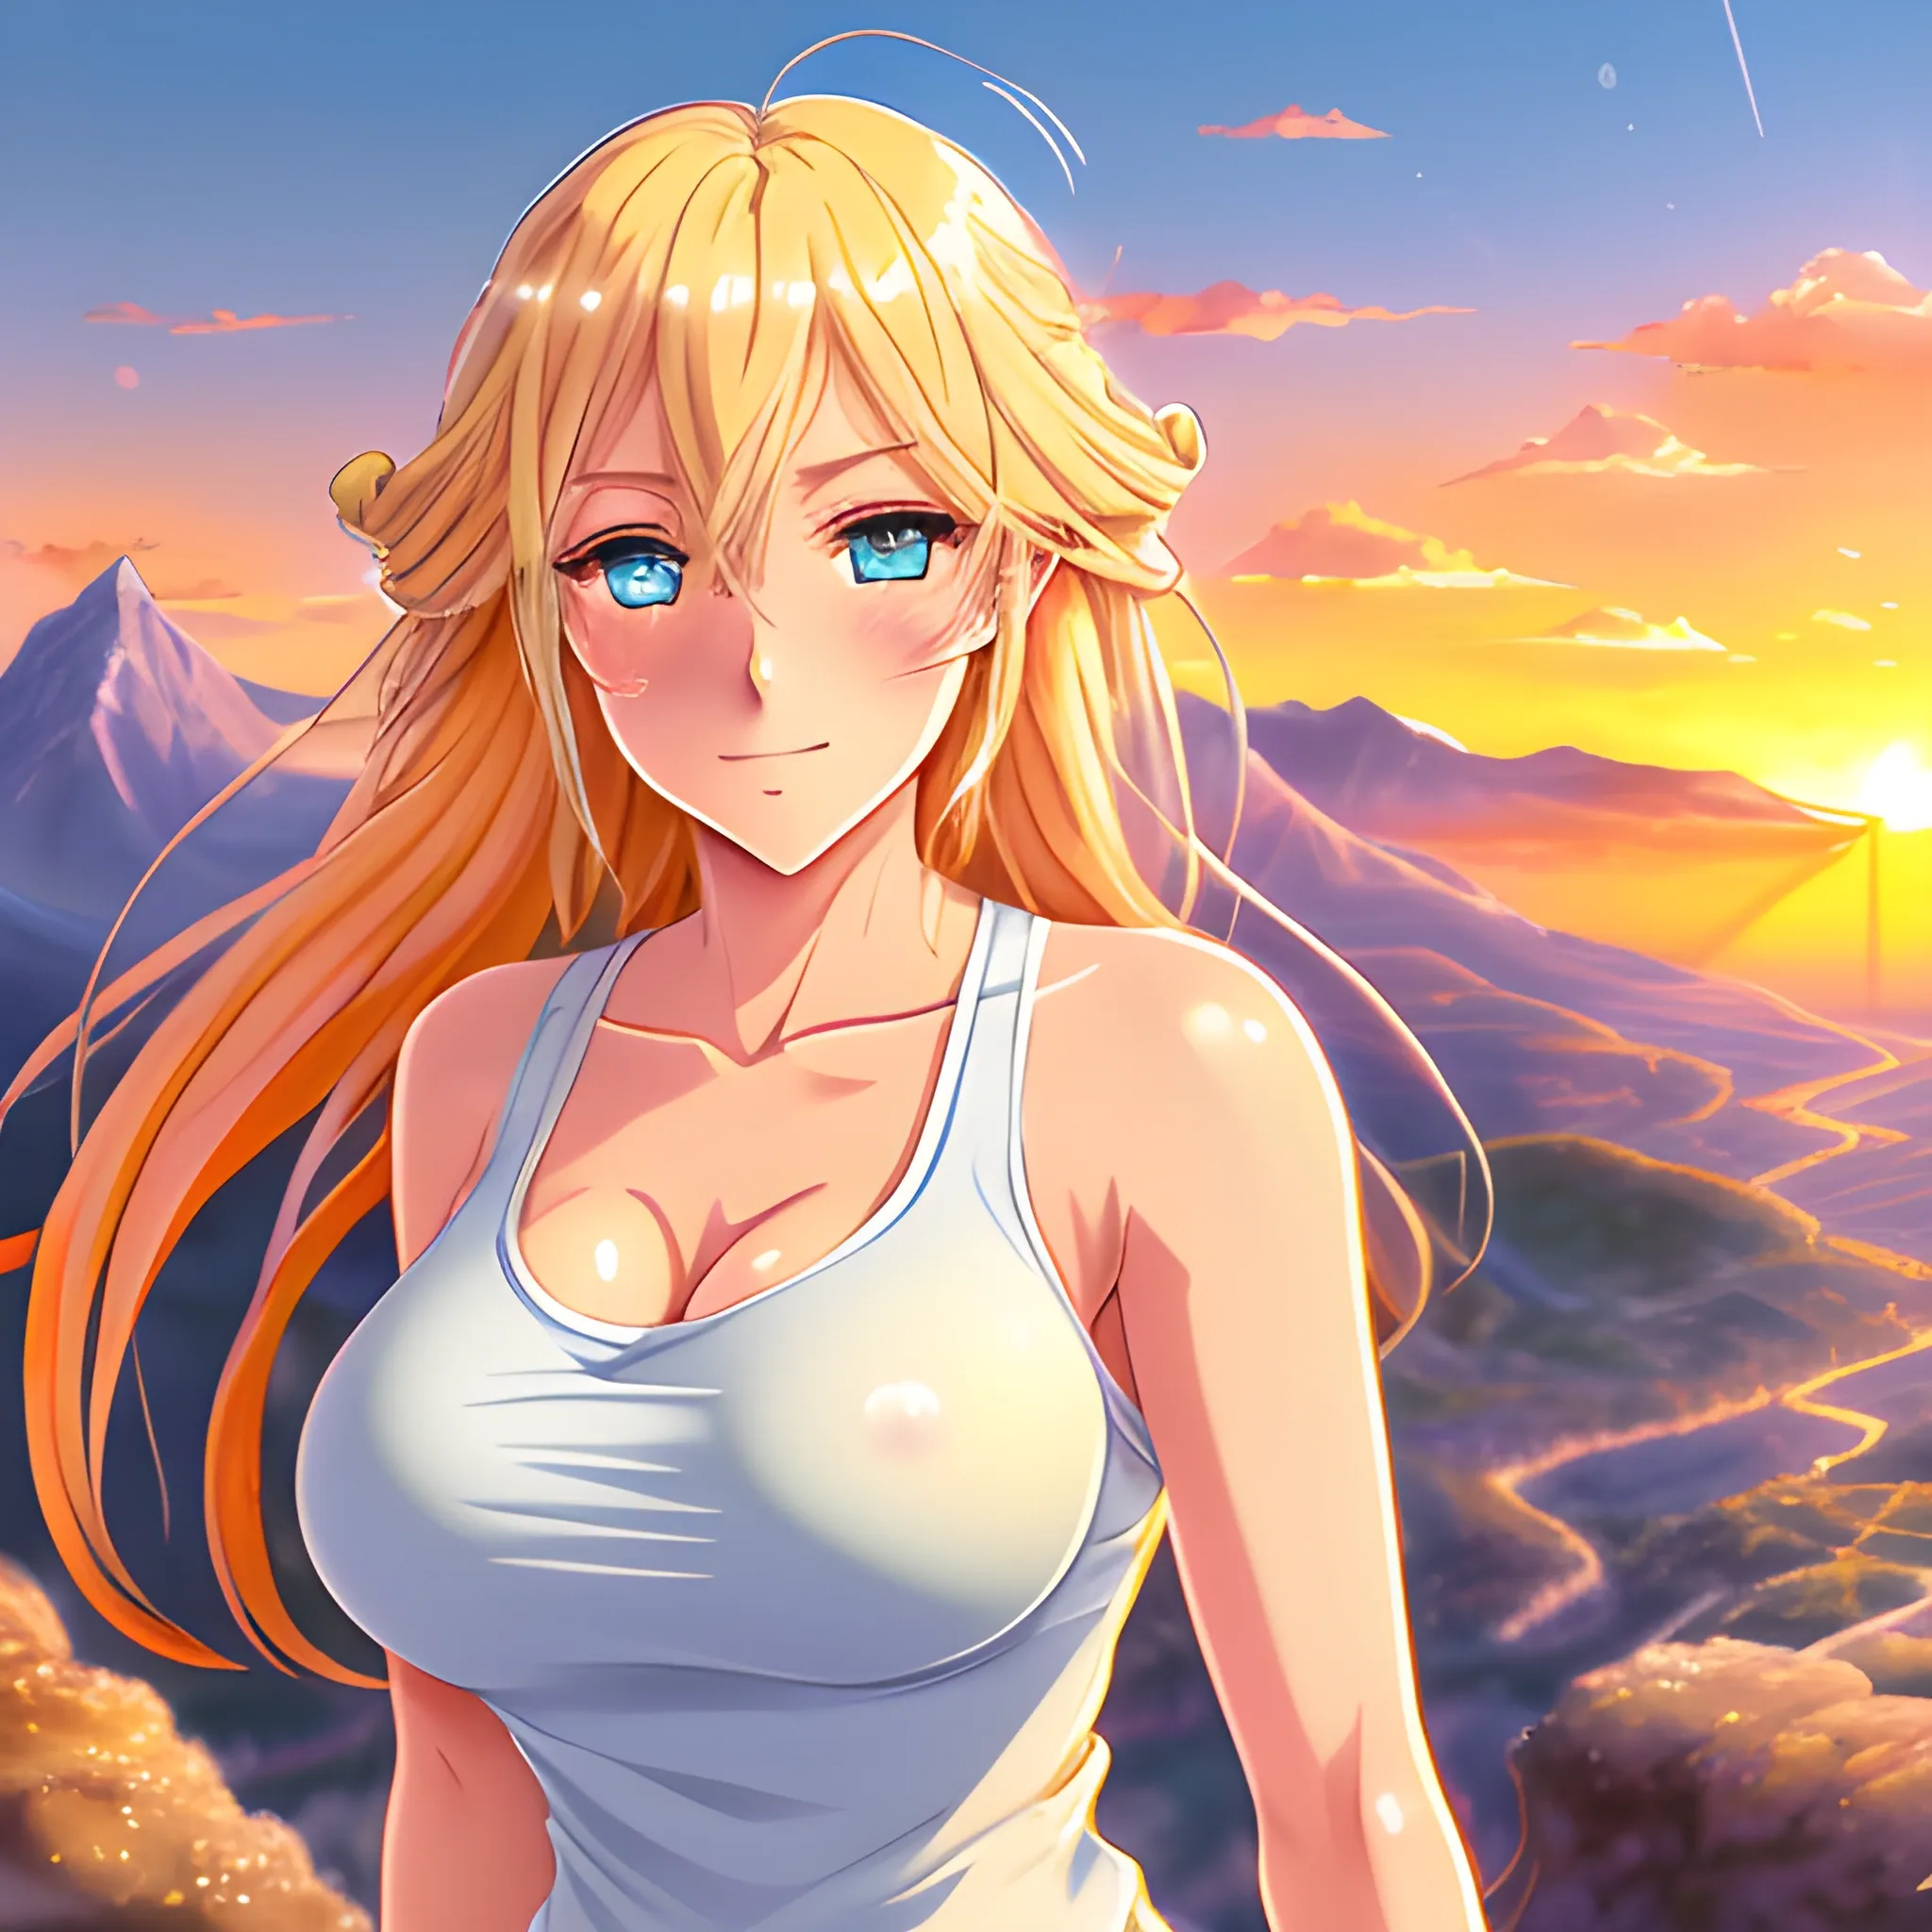 Anime art, cute young girl, semi-long blond hair in motion, rosy cheeks, tender face, big watery blue eyes, looks sad face, small breast, wearing a tank top not revealing, magical and luminous aura around herself, light cinematographic, volumetric light, highly detailed, magic fantasy orange sky in background with sunset, stars and rocky mountains in beginning of dusk, digital painting, size: 3048x3048